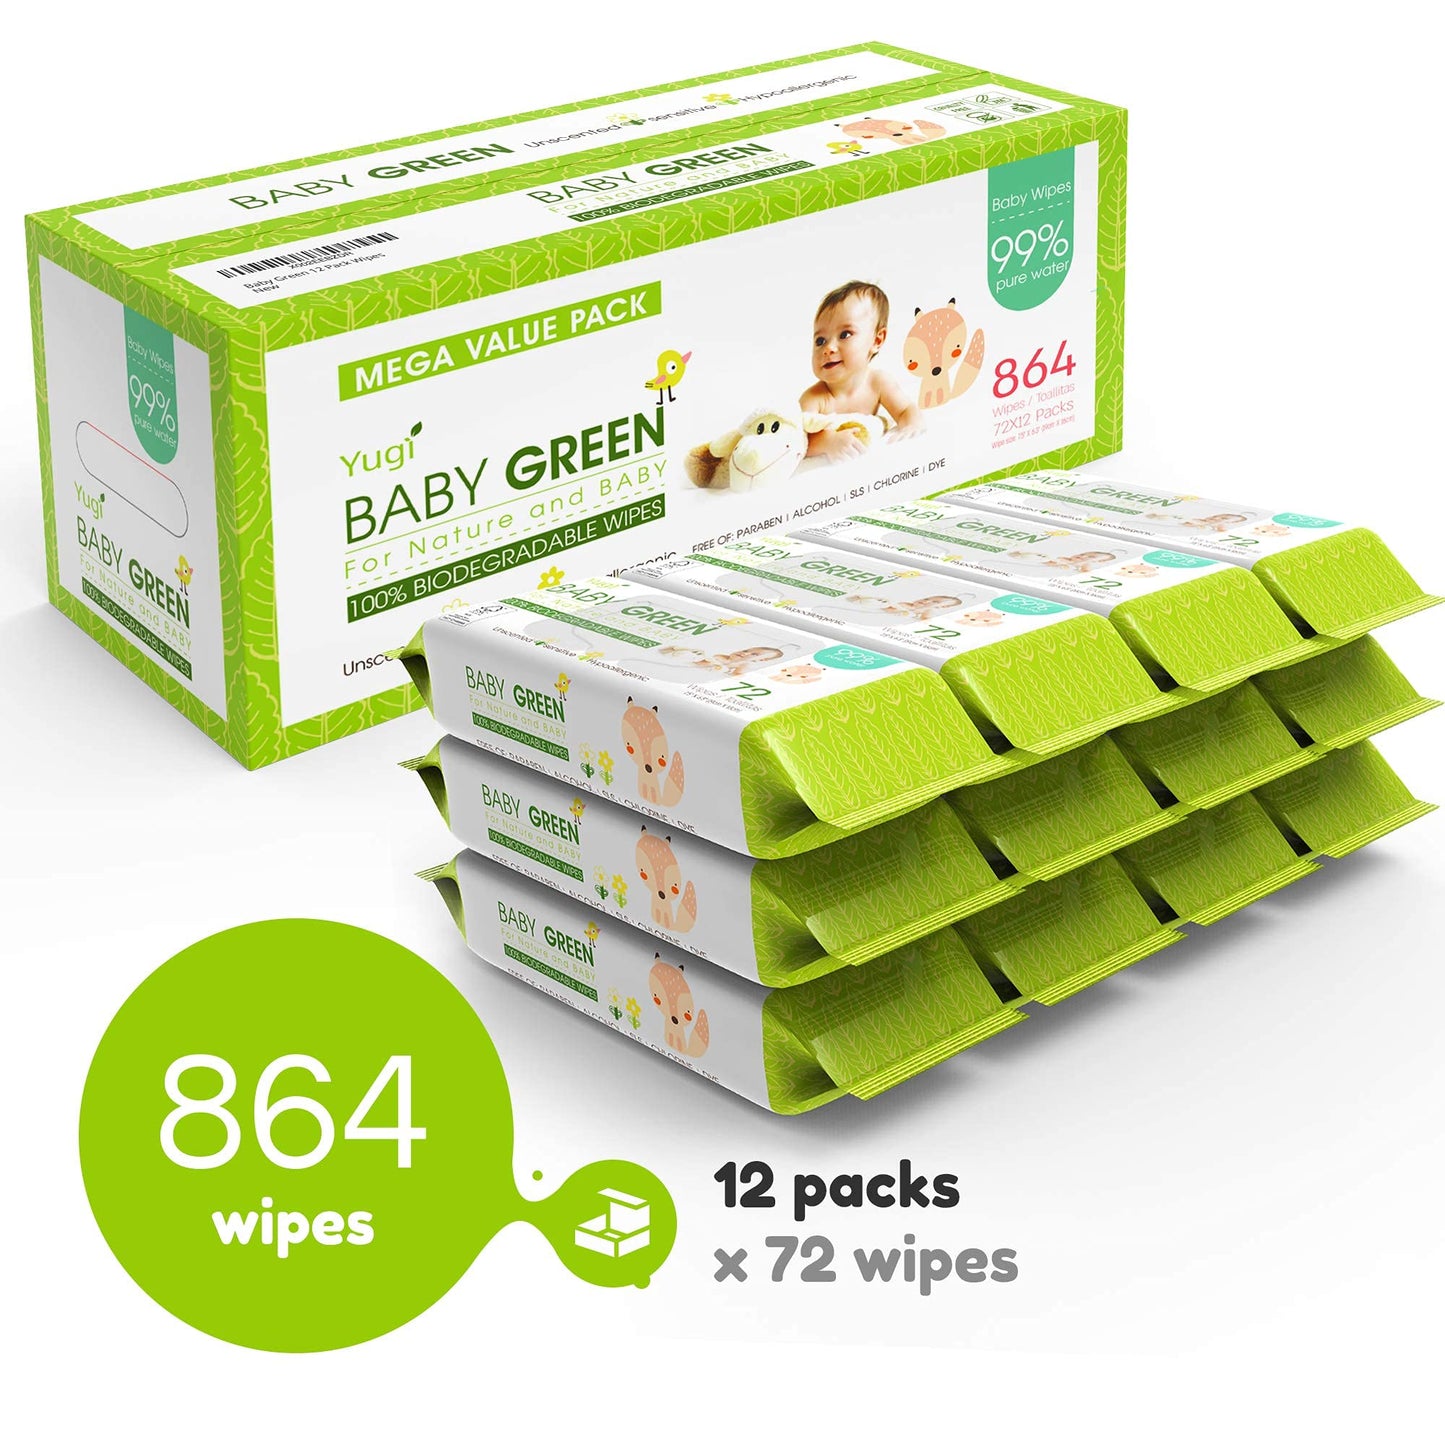 Yugi Green Baby Wipes Unscented Compostable Biodegradable and Organic– Value Pack (12 Packs of 72) 864 for Sensitive Skin & Nose